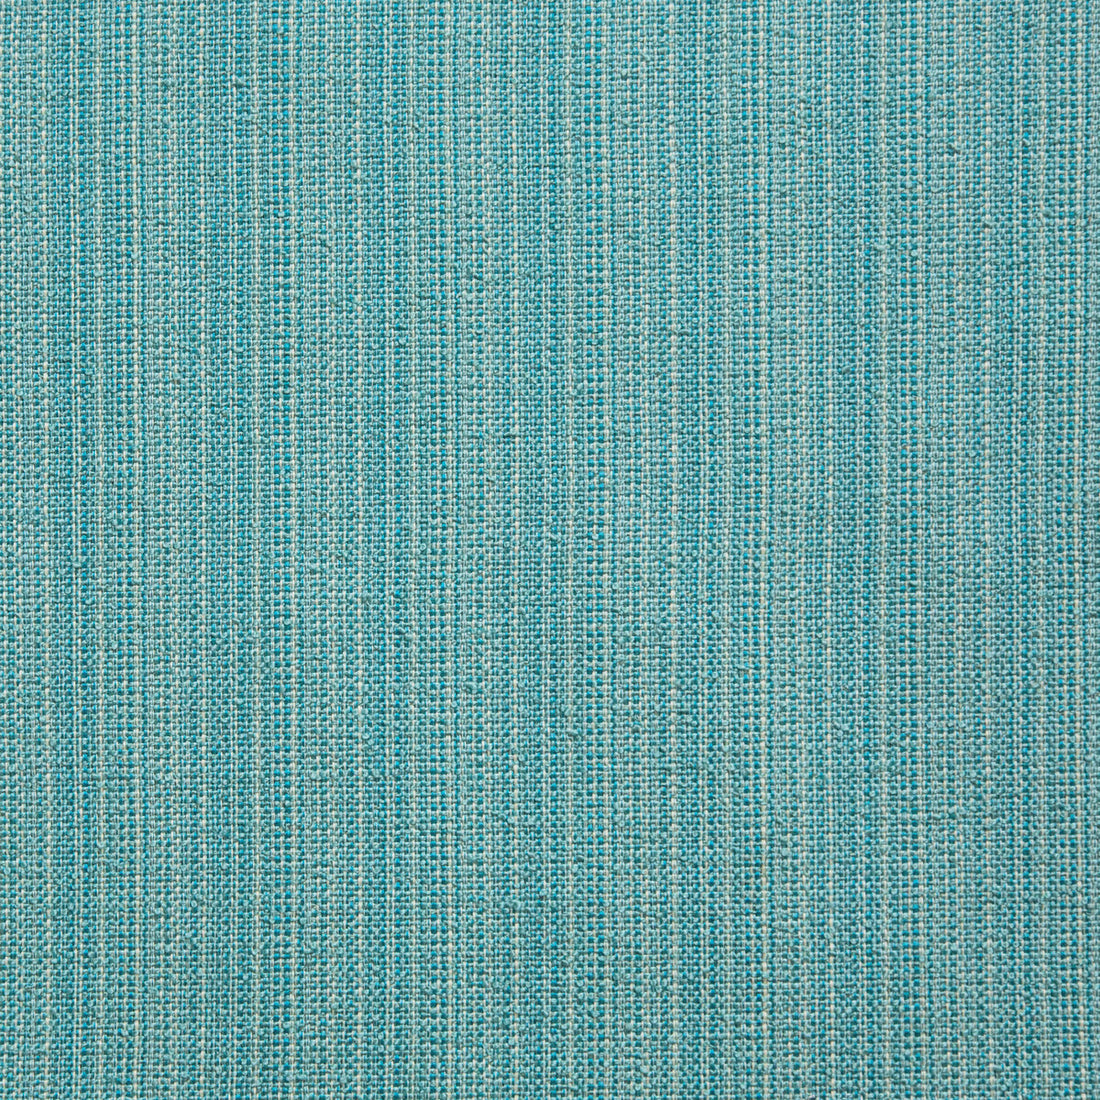 Cruiser Strie fabric in lagoon color - pattern 34499.13.0 - by Kravet Design in the Indoor / Outdoor collection